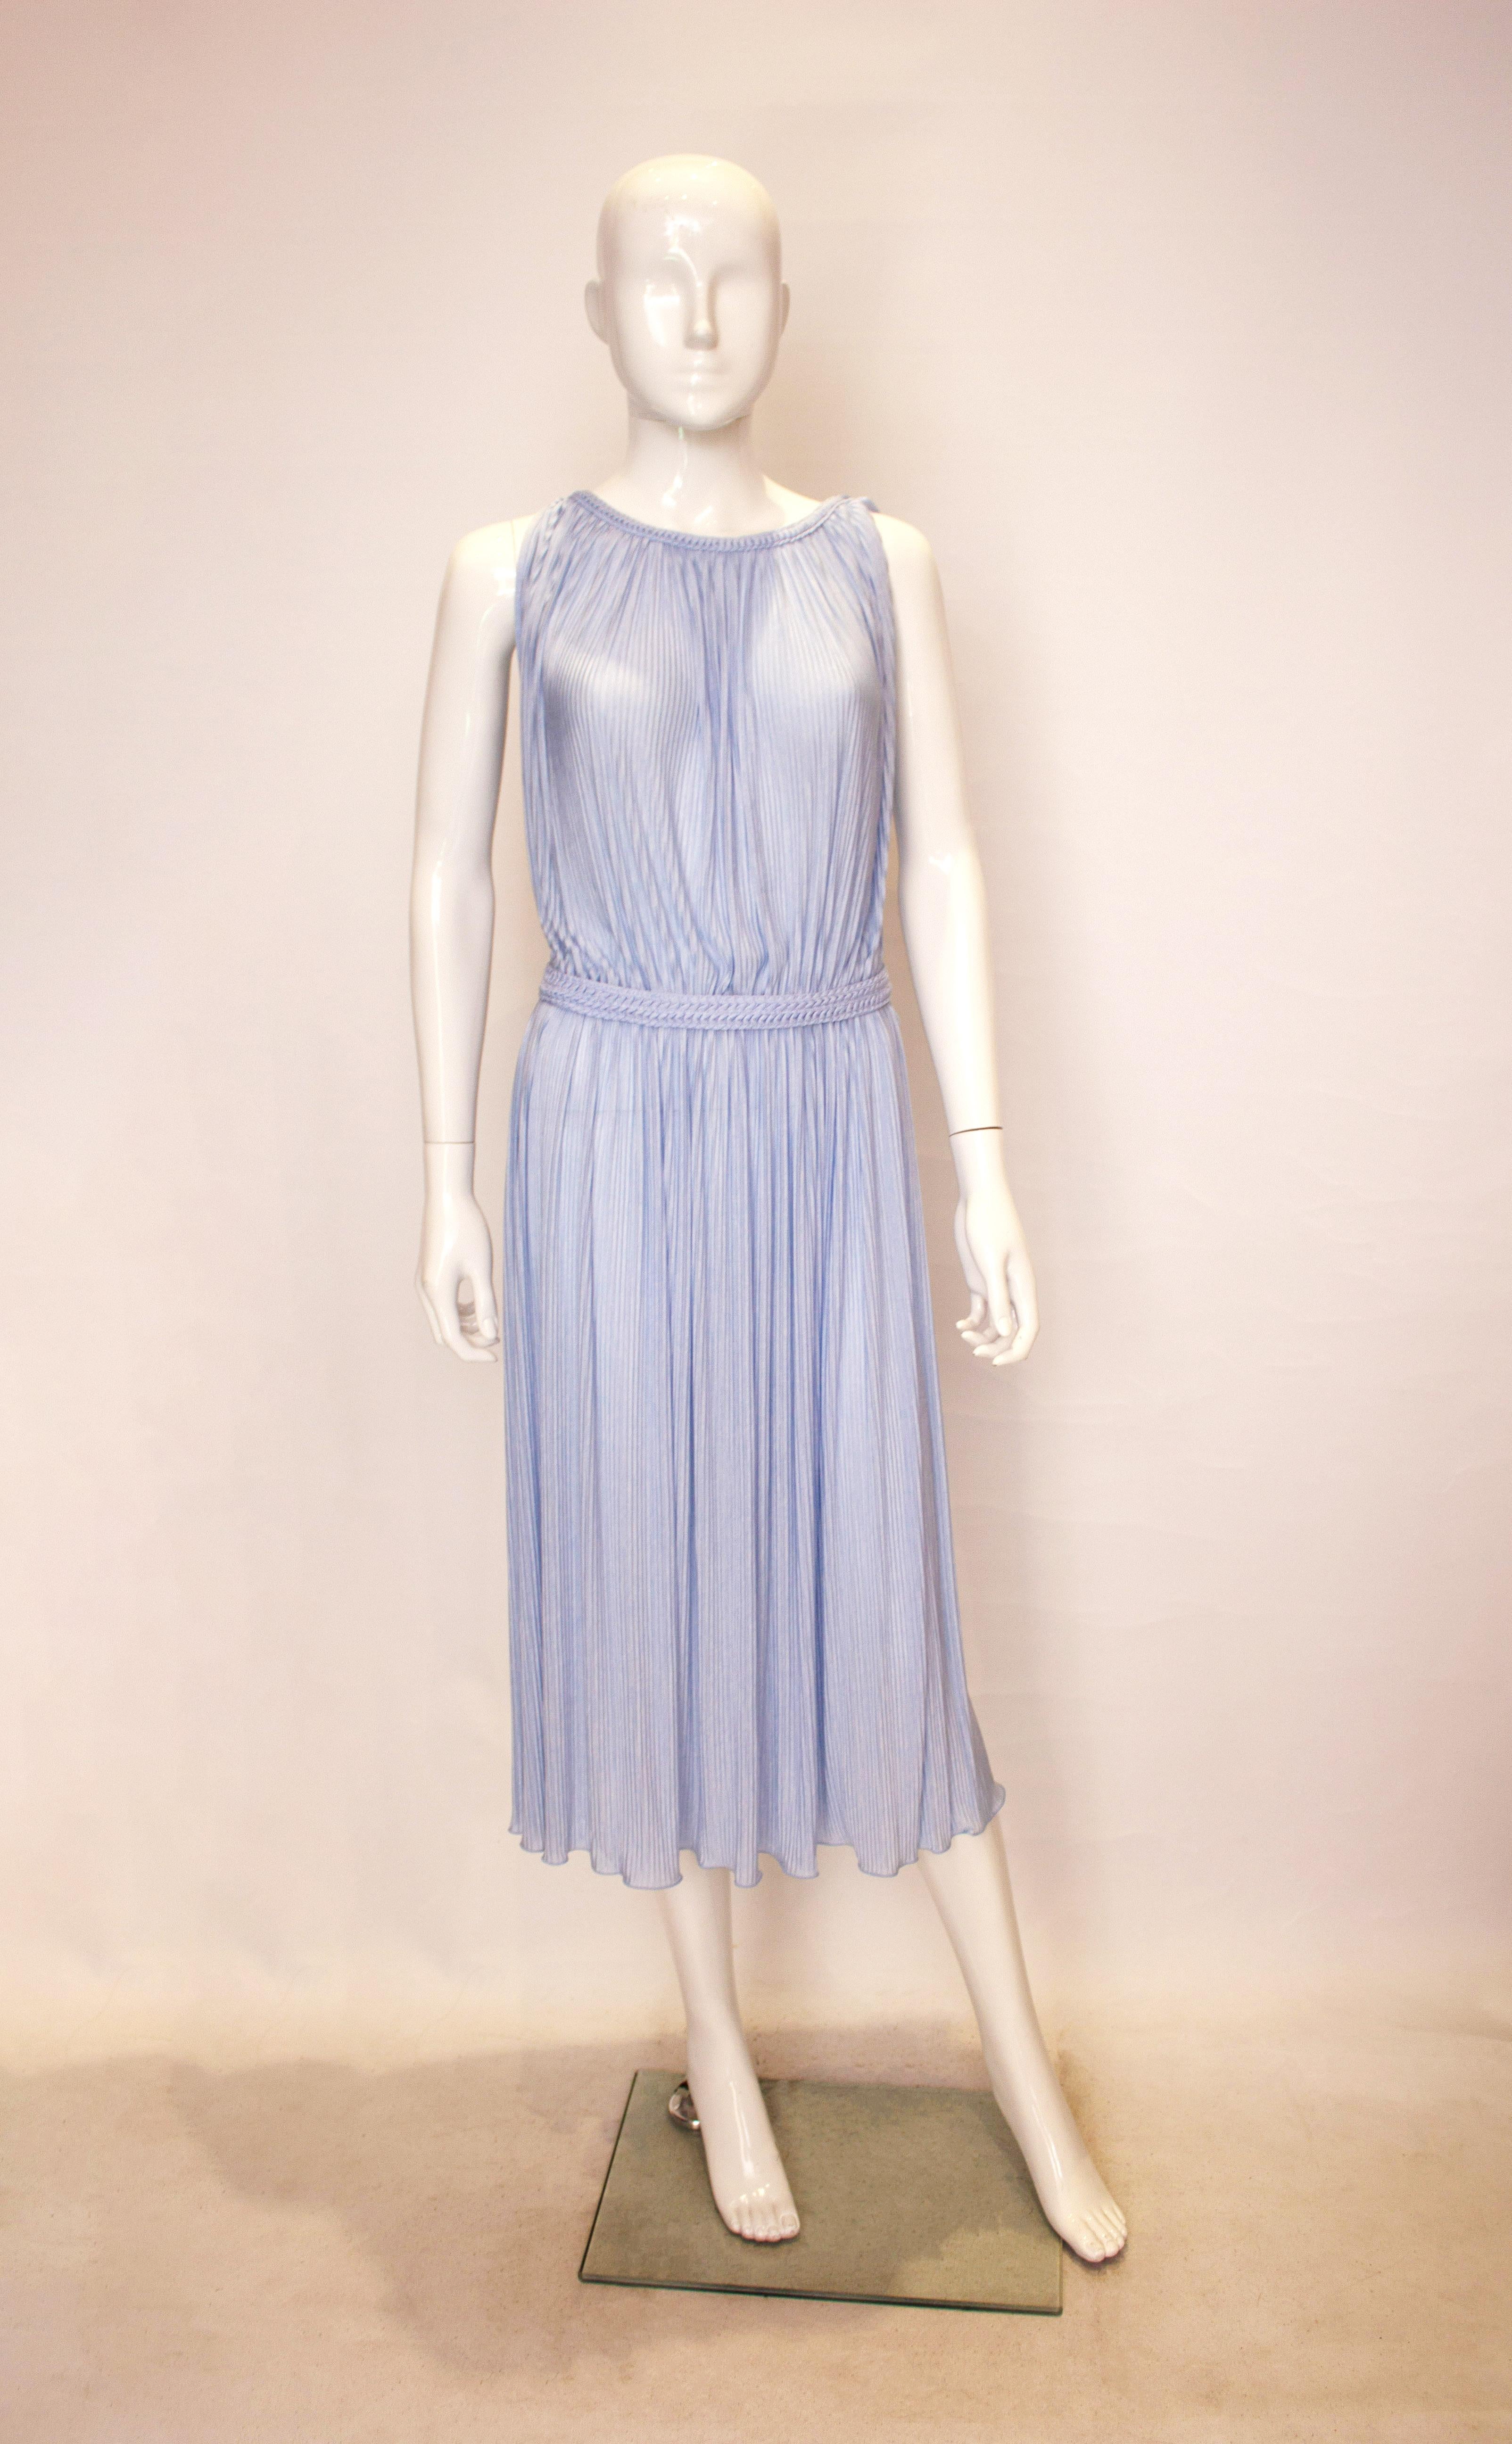 A chic vintage dress by Radley in a pretty ice blue colour.  The dress is in a pleated fabric with plait detail around the neckline , and a bow tie on the left shoulder . It has an elasticated waist and can fit a waist 26'' -32''.  It has a key hole